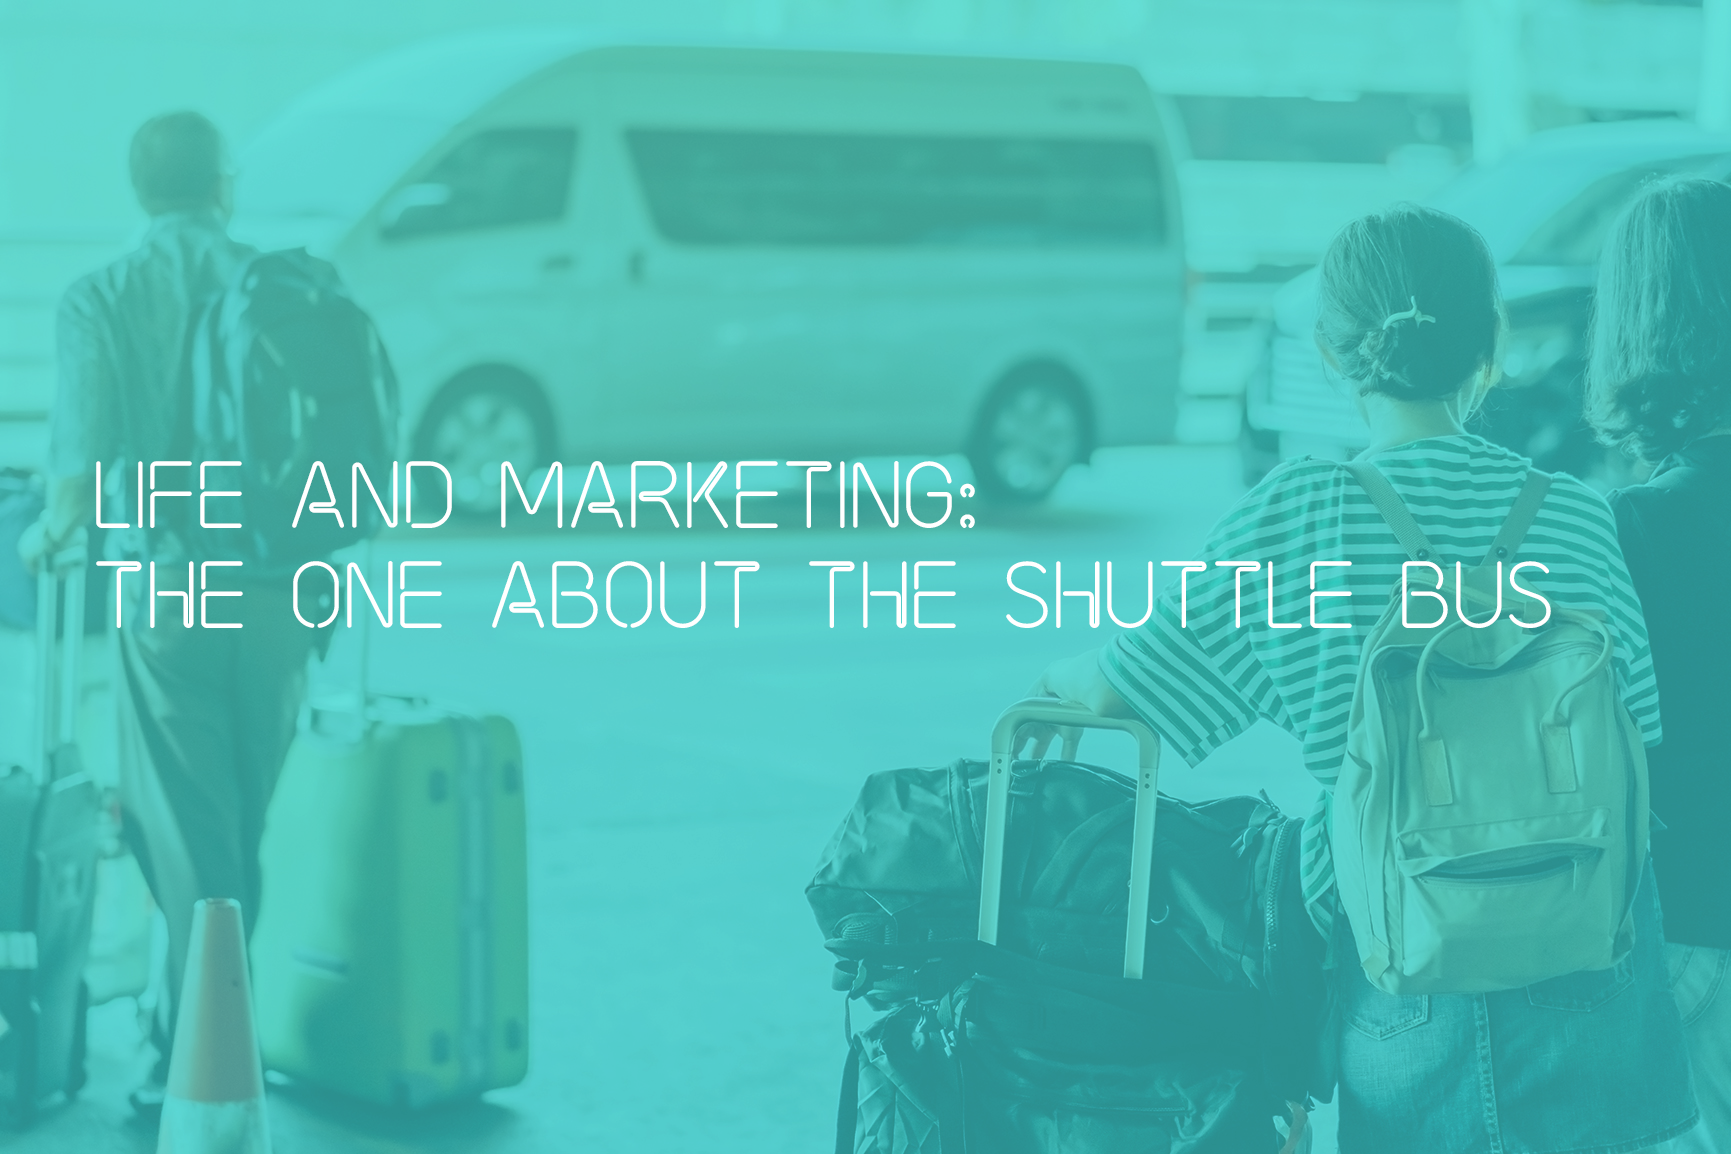 Life and marketing: the shuttle bus